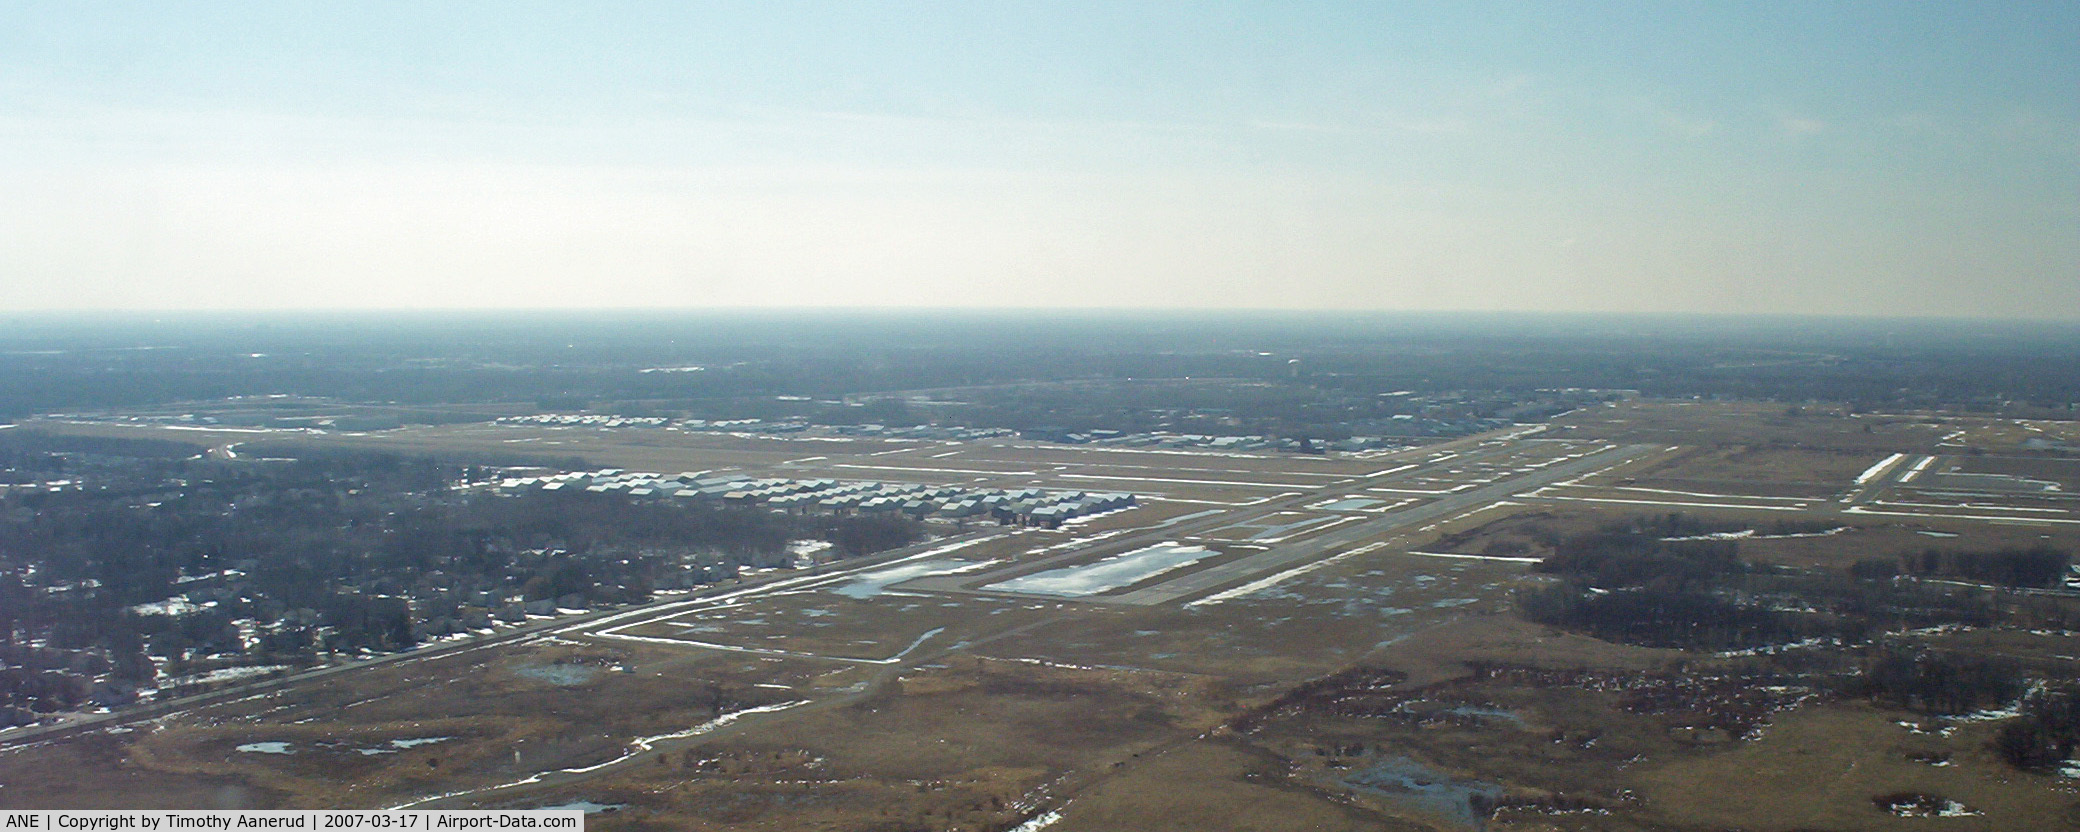 Anoka County-blaine Arpt(janes Field) Airport (ANE) - taken north east of the airport looking south west